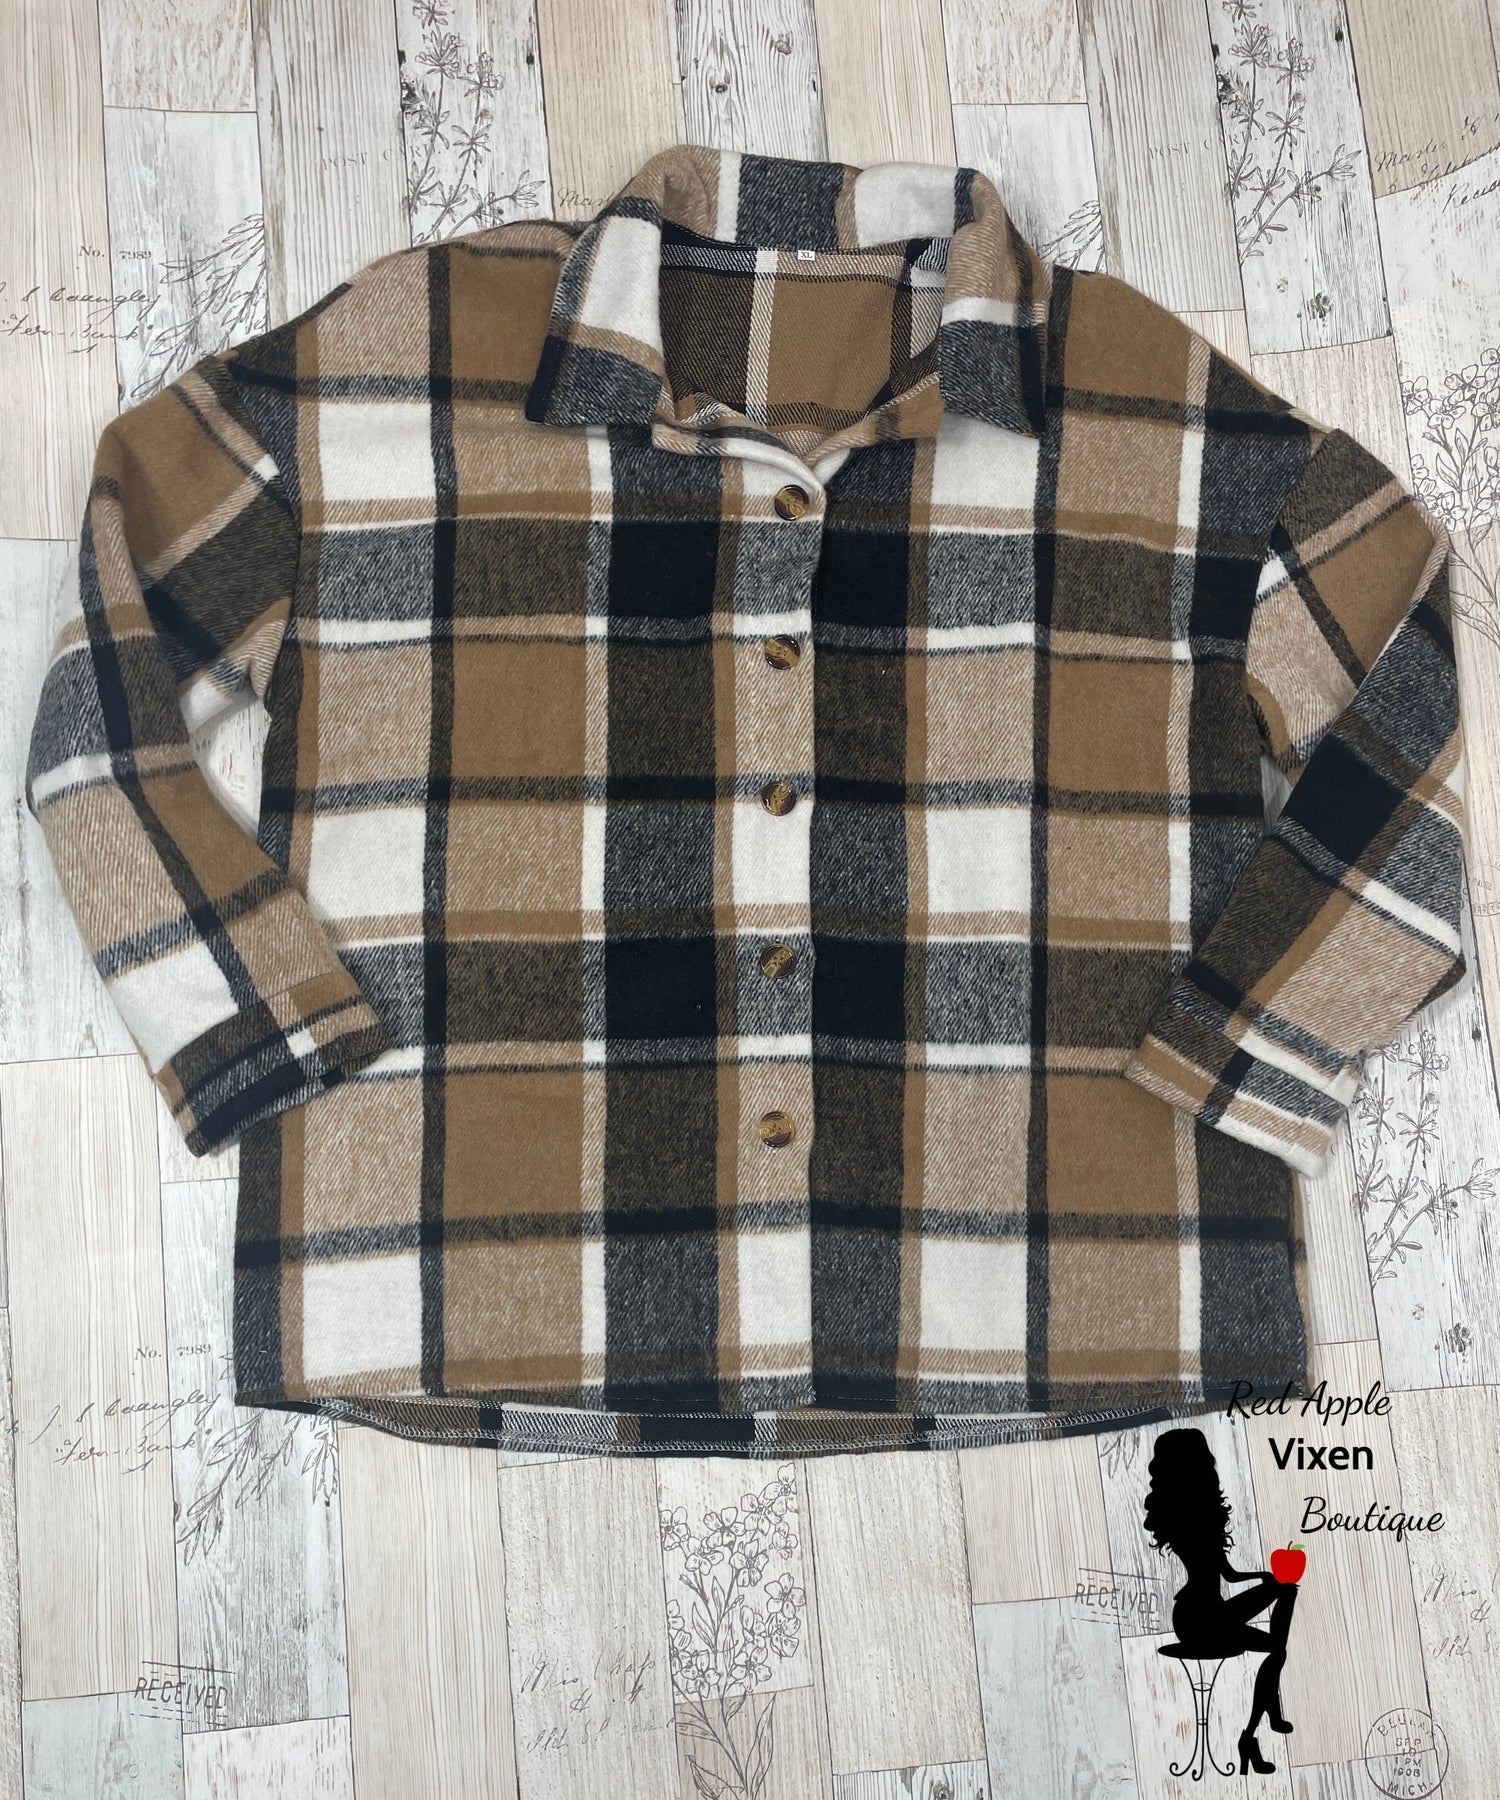 Grey and Tan Plaid Shacket - Red Apple Vixen Boutique